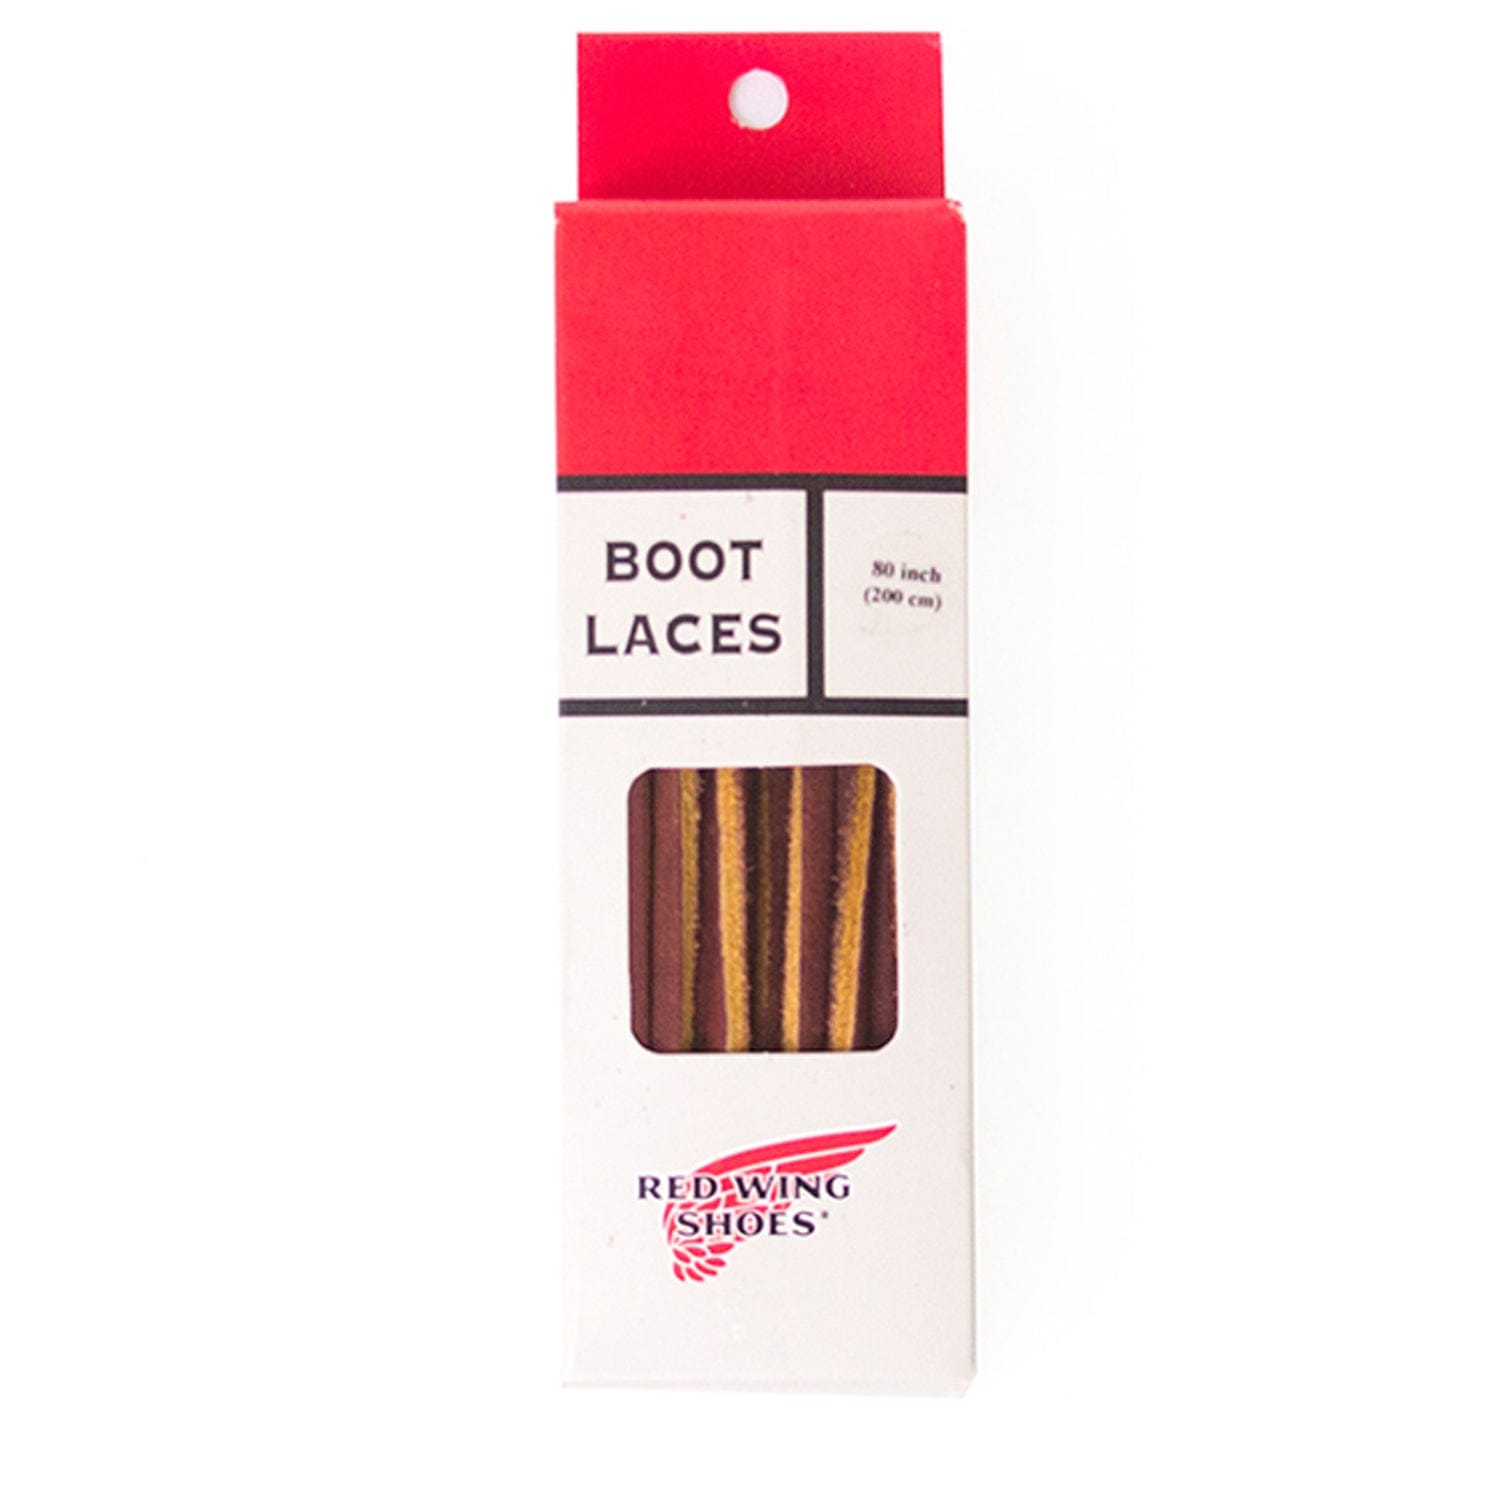 red leather shoe laces